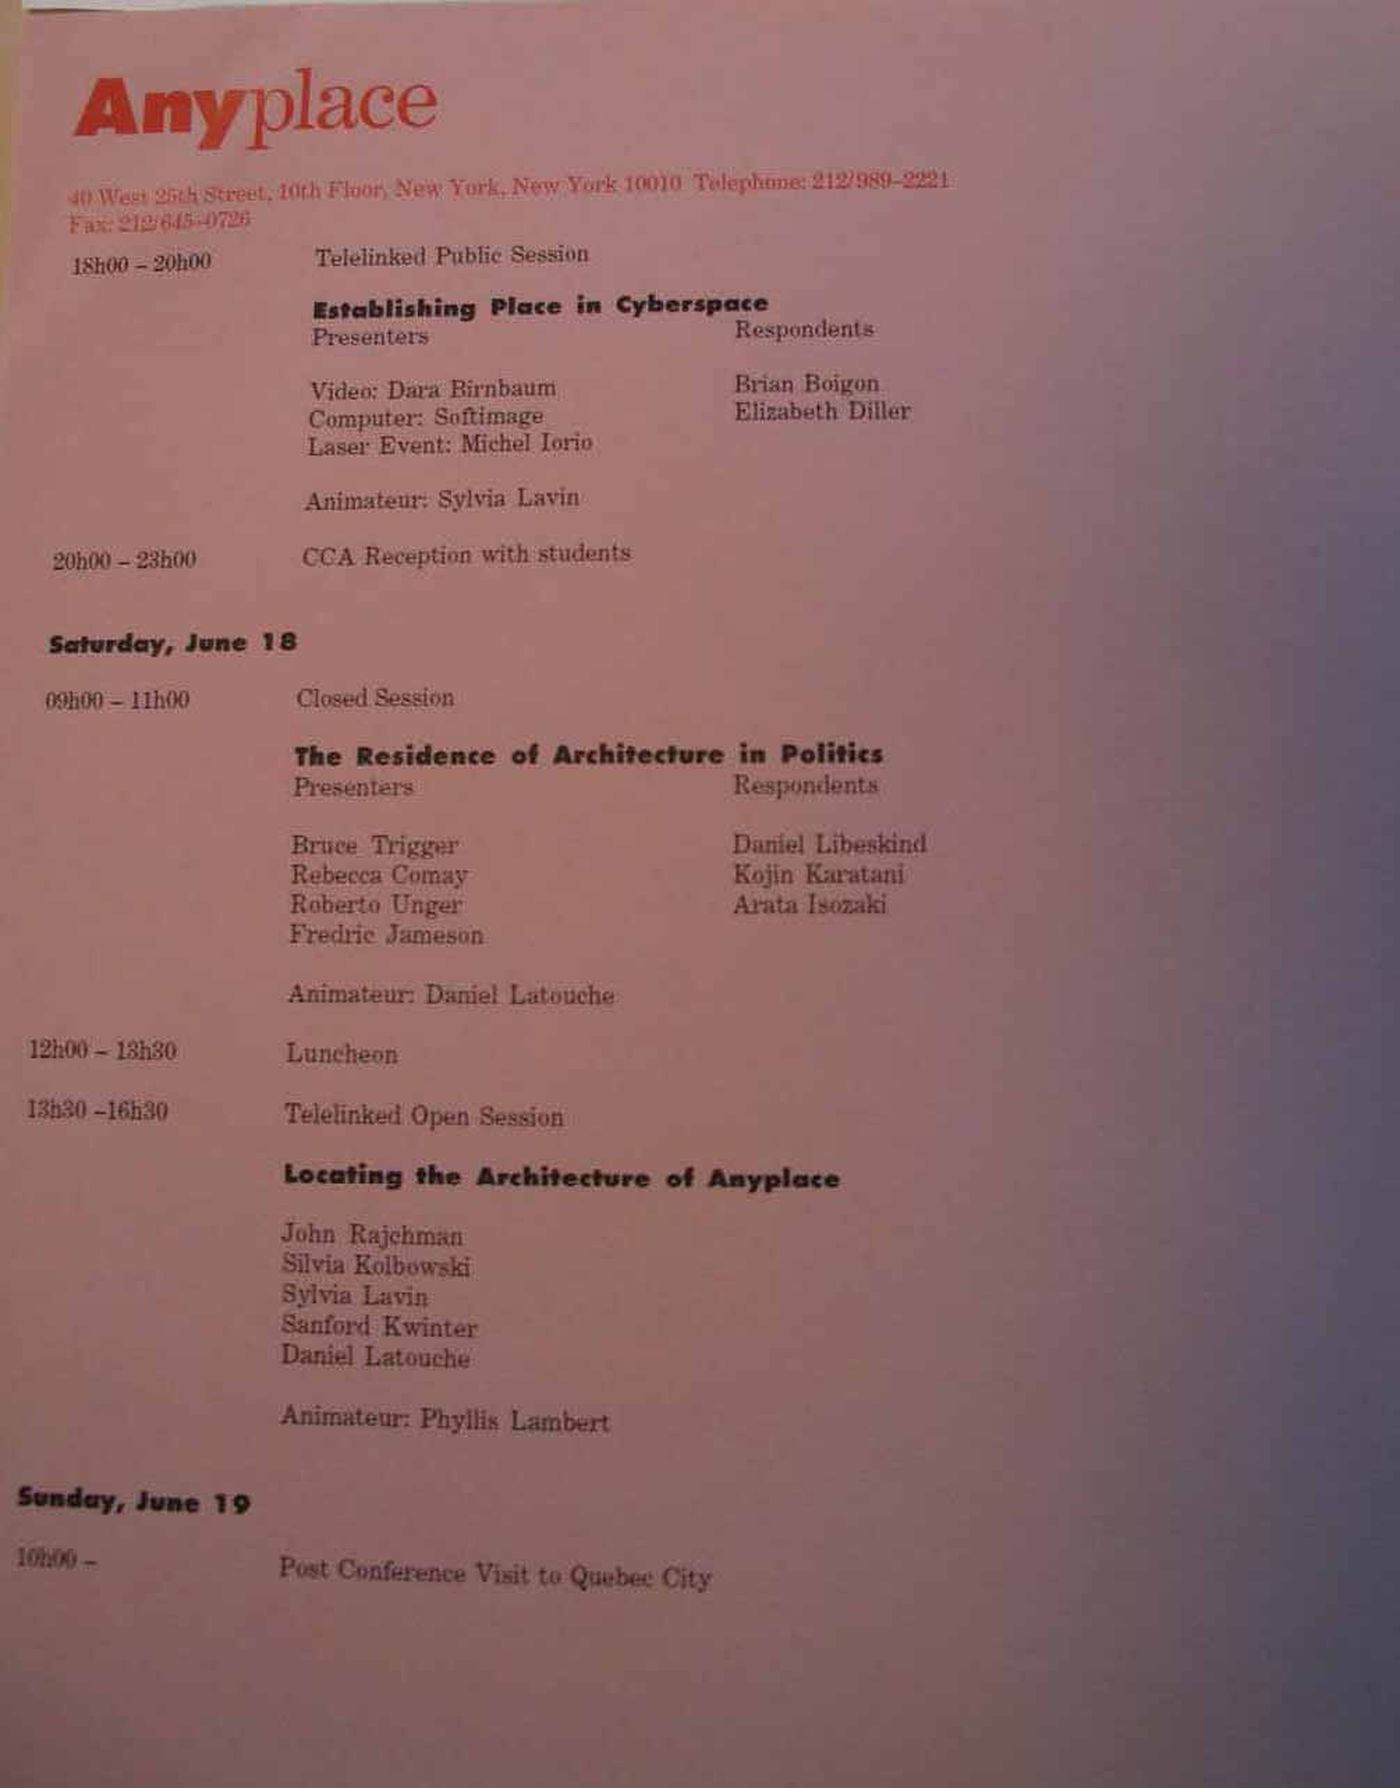 Program for the fourth Any conference